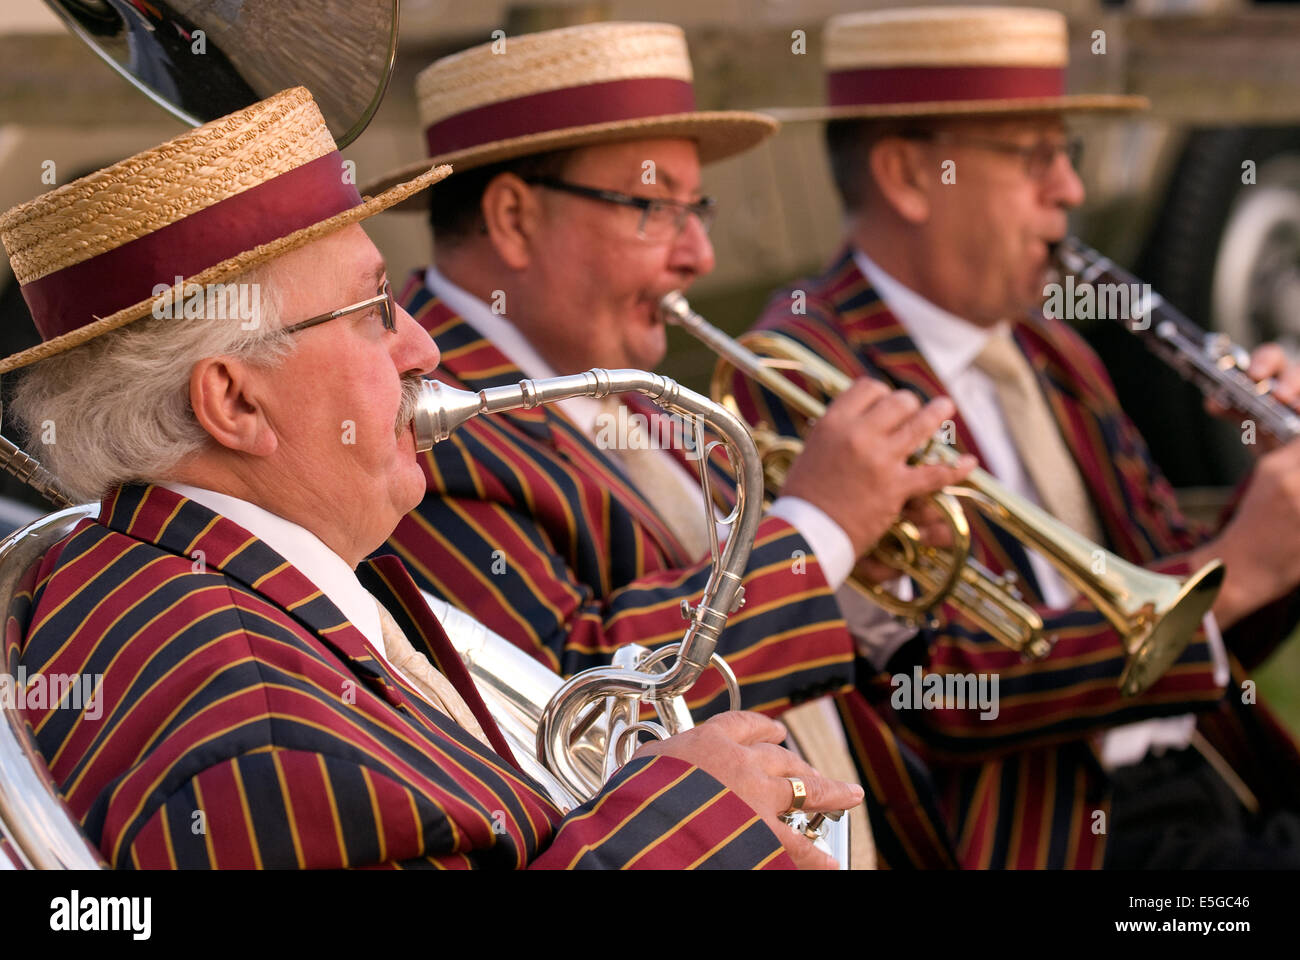 Jazz band entertaining the crowds at a fundraising event for local charities, Churt, near Farnham, Surrey, UK. Stock Photo